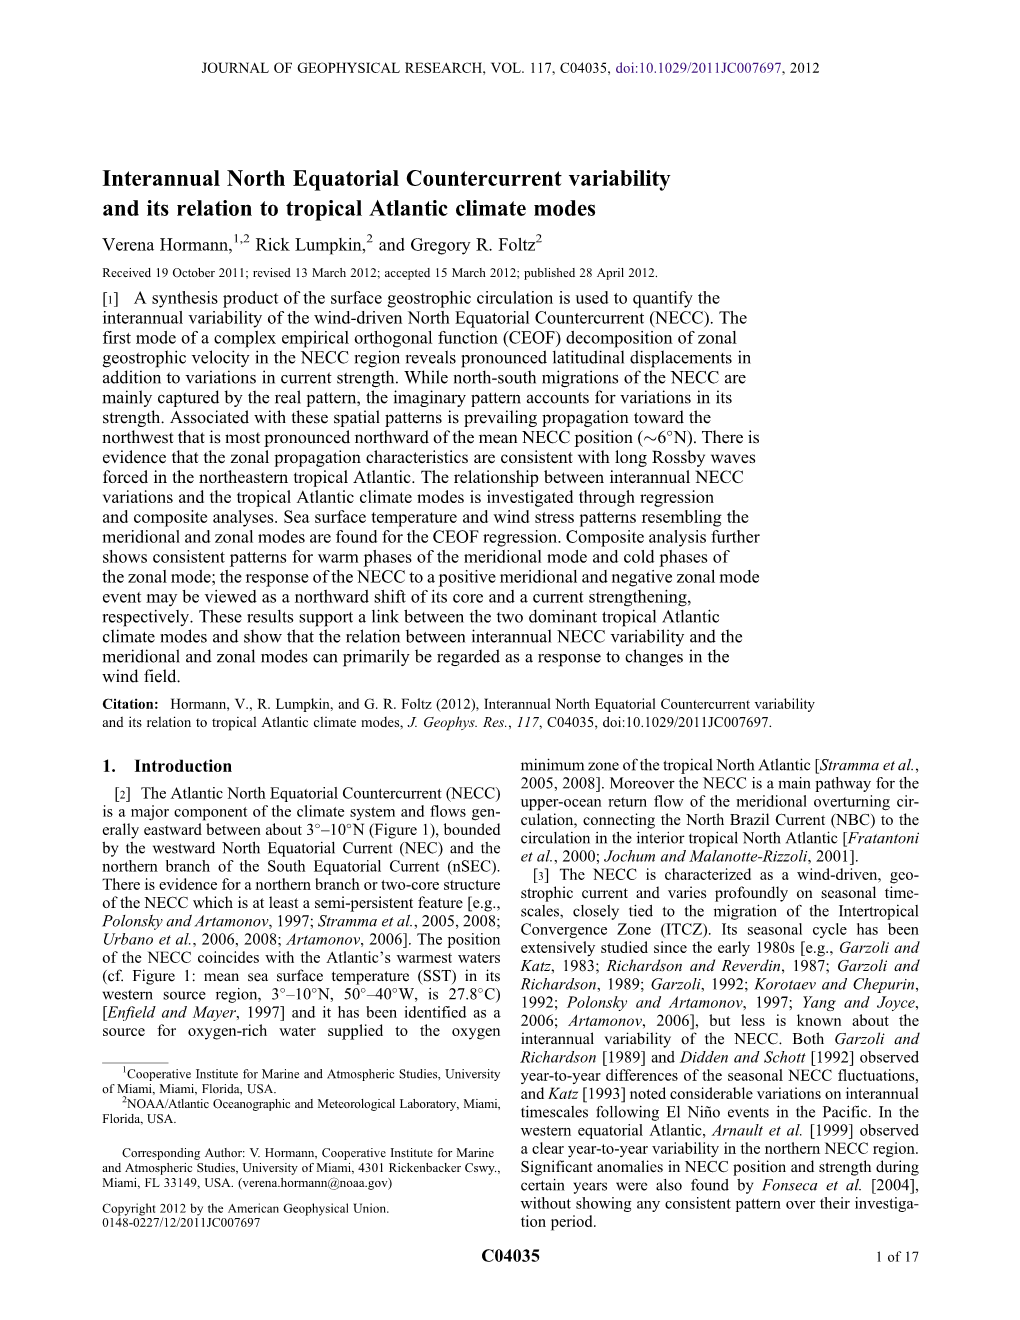 Interannual North Equatorial Countercurrent Variability and Its Relation to Tropical Atlantic Climate Modes Verena Hormann,1,2 Rick Lumpkin,2 and Gregory R